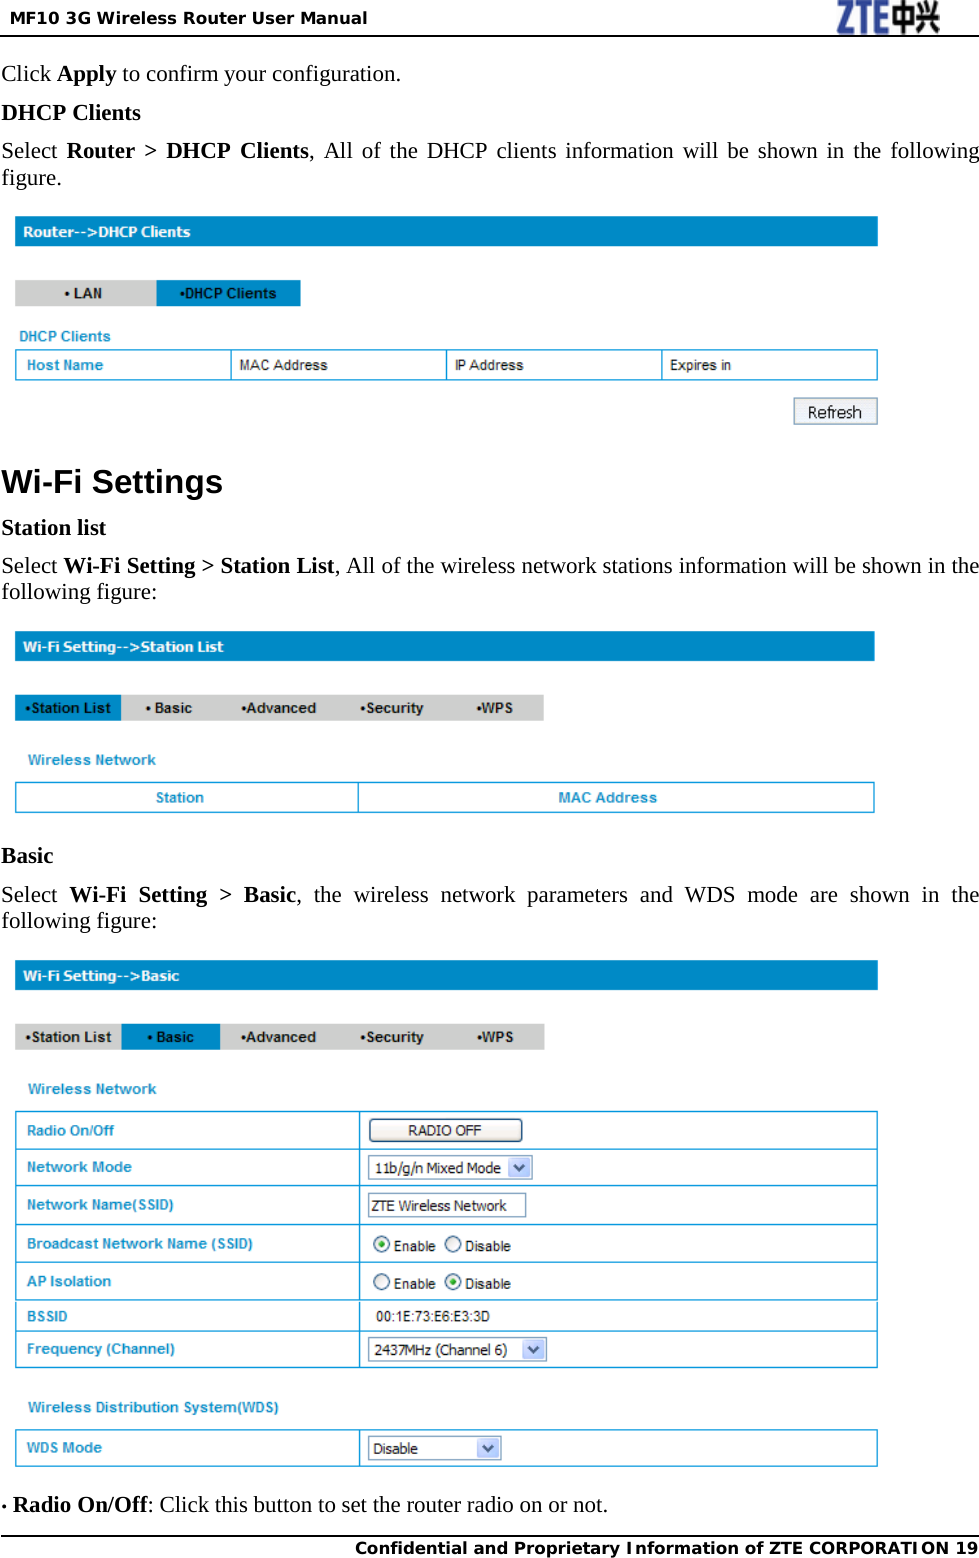  MF10 3G Wireless Router User Manual  Confidential and Proprietary Information of ZTE CORPORATION 19   Click Apply to confirm your configuration. DHCP Clients Select Router &gt; DHCP Clients, All of the DHCP clients information will be shown in the following figure.  Wi-Fi Settings Station list Select Wi-Fi Setting &gt; Station List, All of the wireless network stations information will be shown in the following figure:  Basic Select  Wi-Fi Setting &gt; Basic, the wireless network parameters and WDS mode are shown in the following figure:  • Radio On/Off: Click this button to set the router radio on or not. 